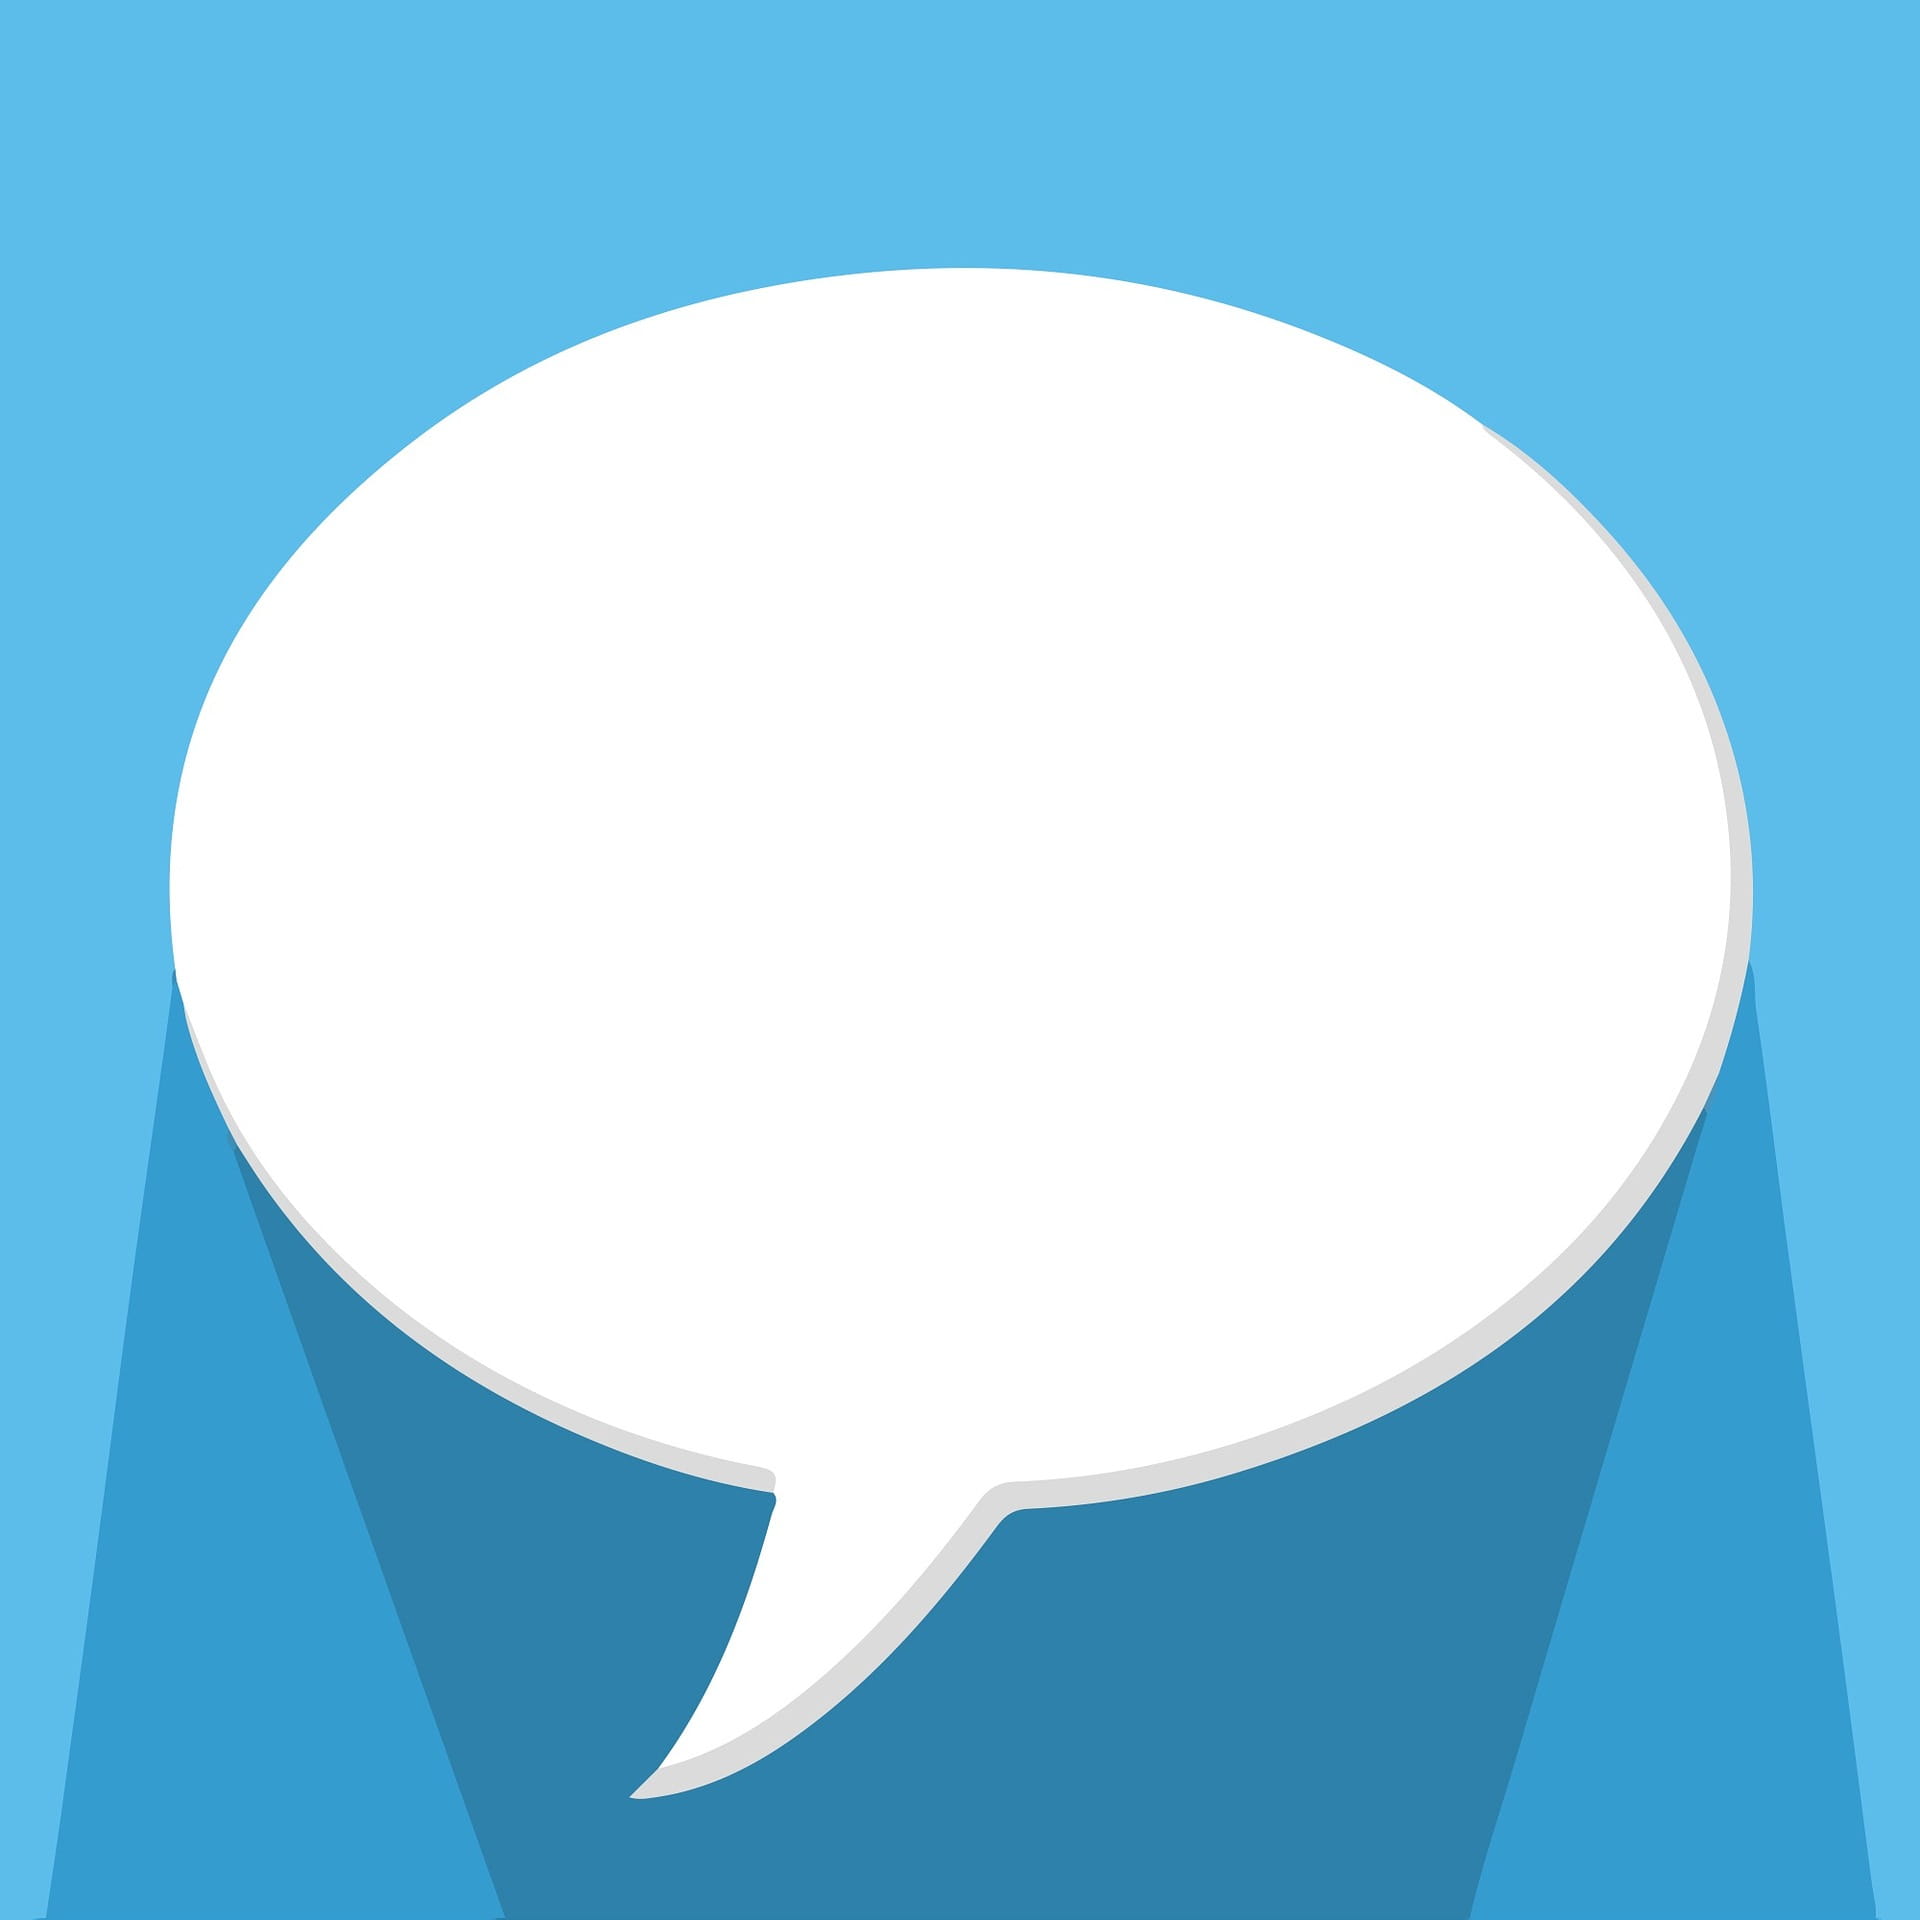 White speech bubble icon on a blue background.